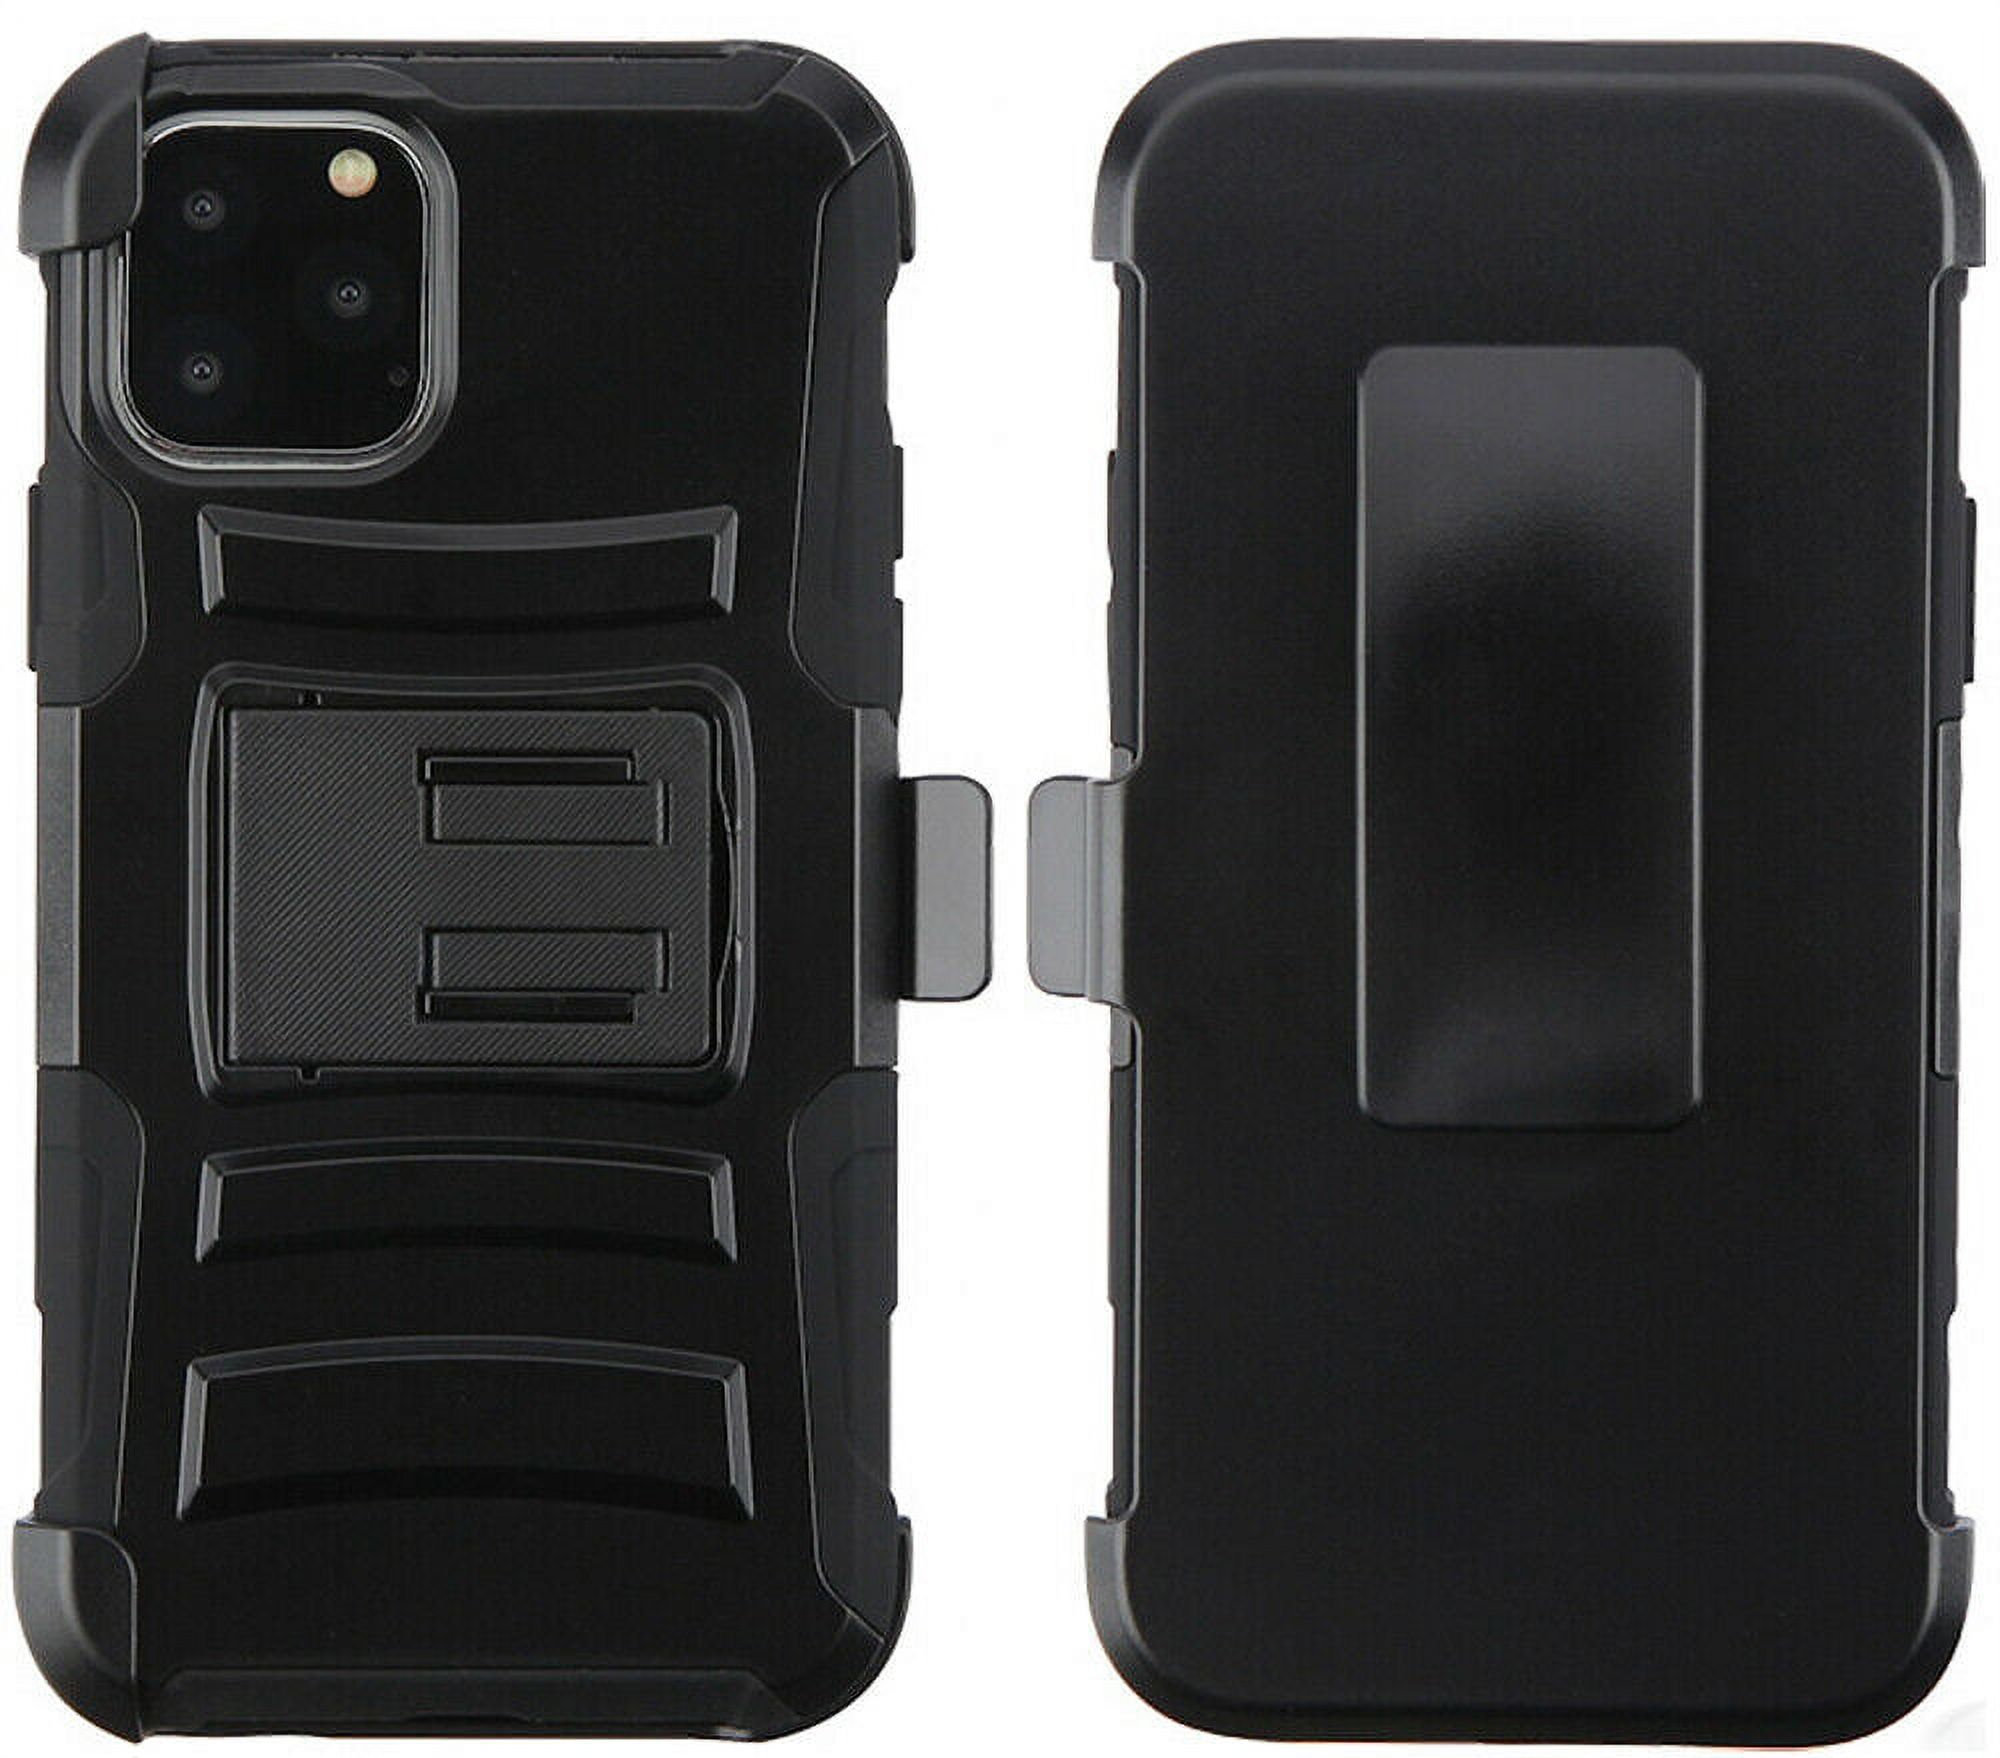 Kaleidio Case For Apple iPhone 11 Pro (5.8") [Dual Form] Rugged Holster [Swivel Belt Clip][Shockproof] Dual Layer Hybrid [Kickstand] Armor Cover w/ Overbrawn Prying Tool [Black/Black] - image 1 of 5